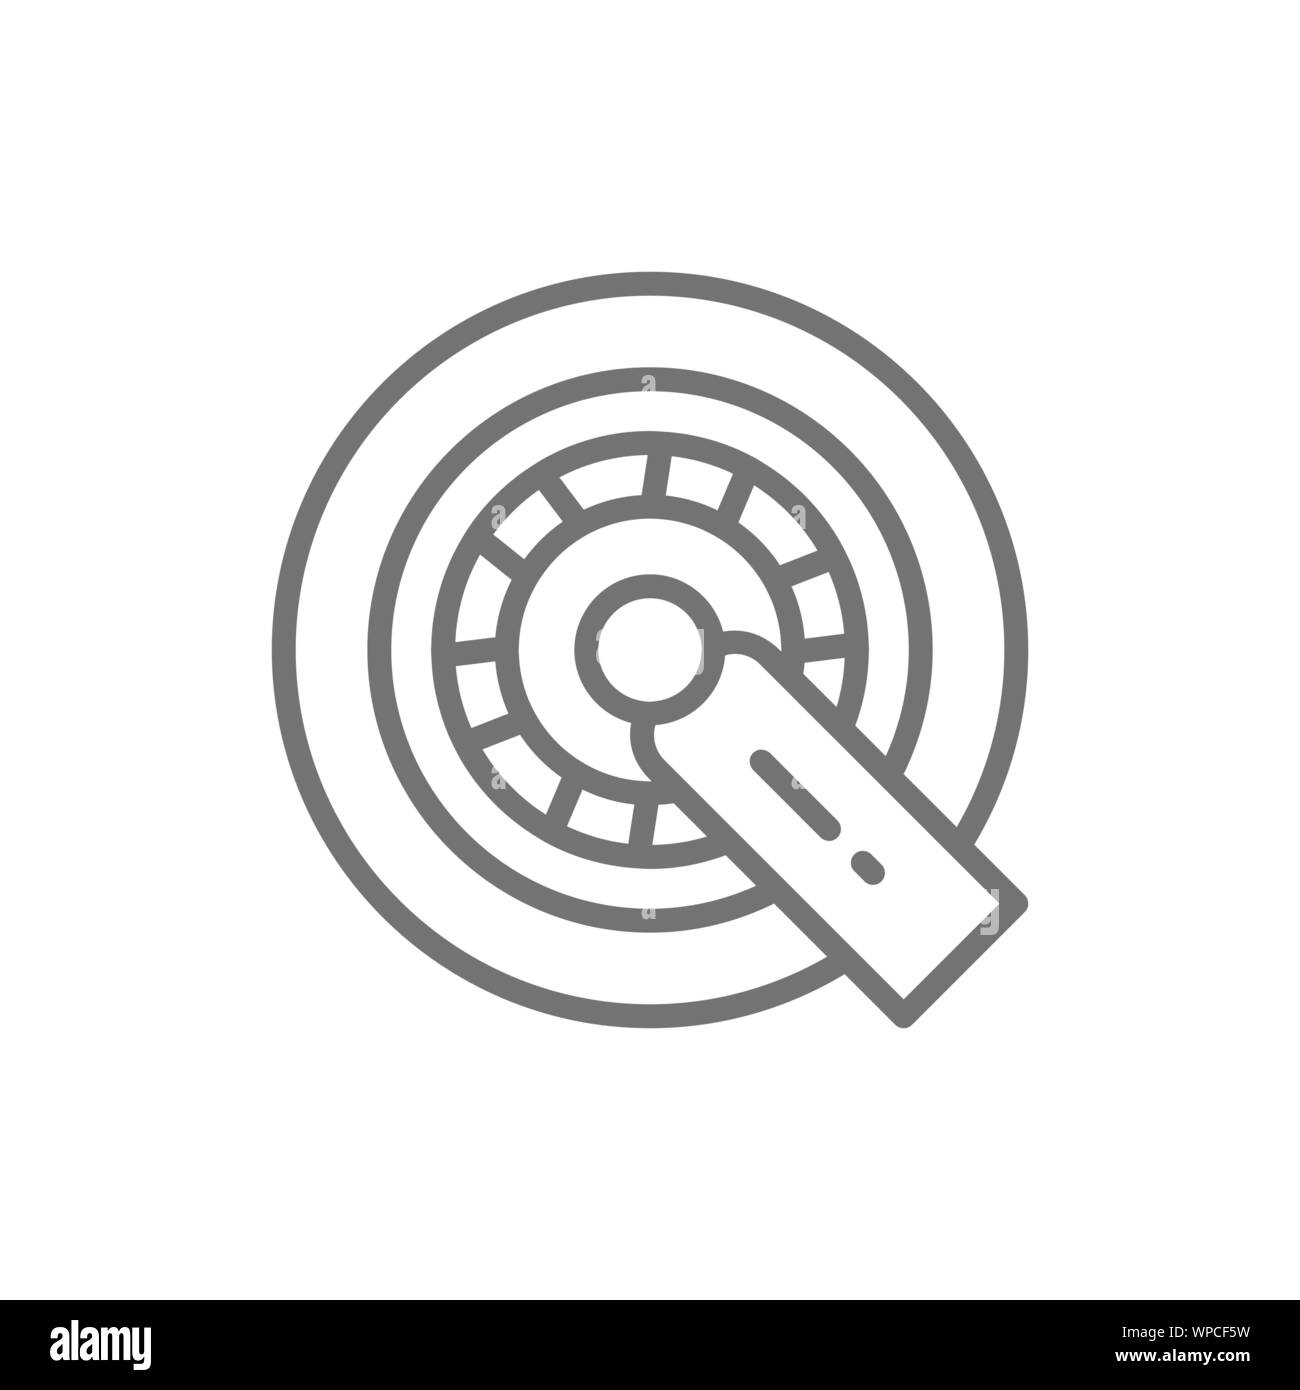 Car wheel lock line icon. Isolated on white background Stock Vector